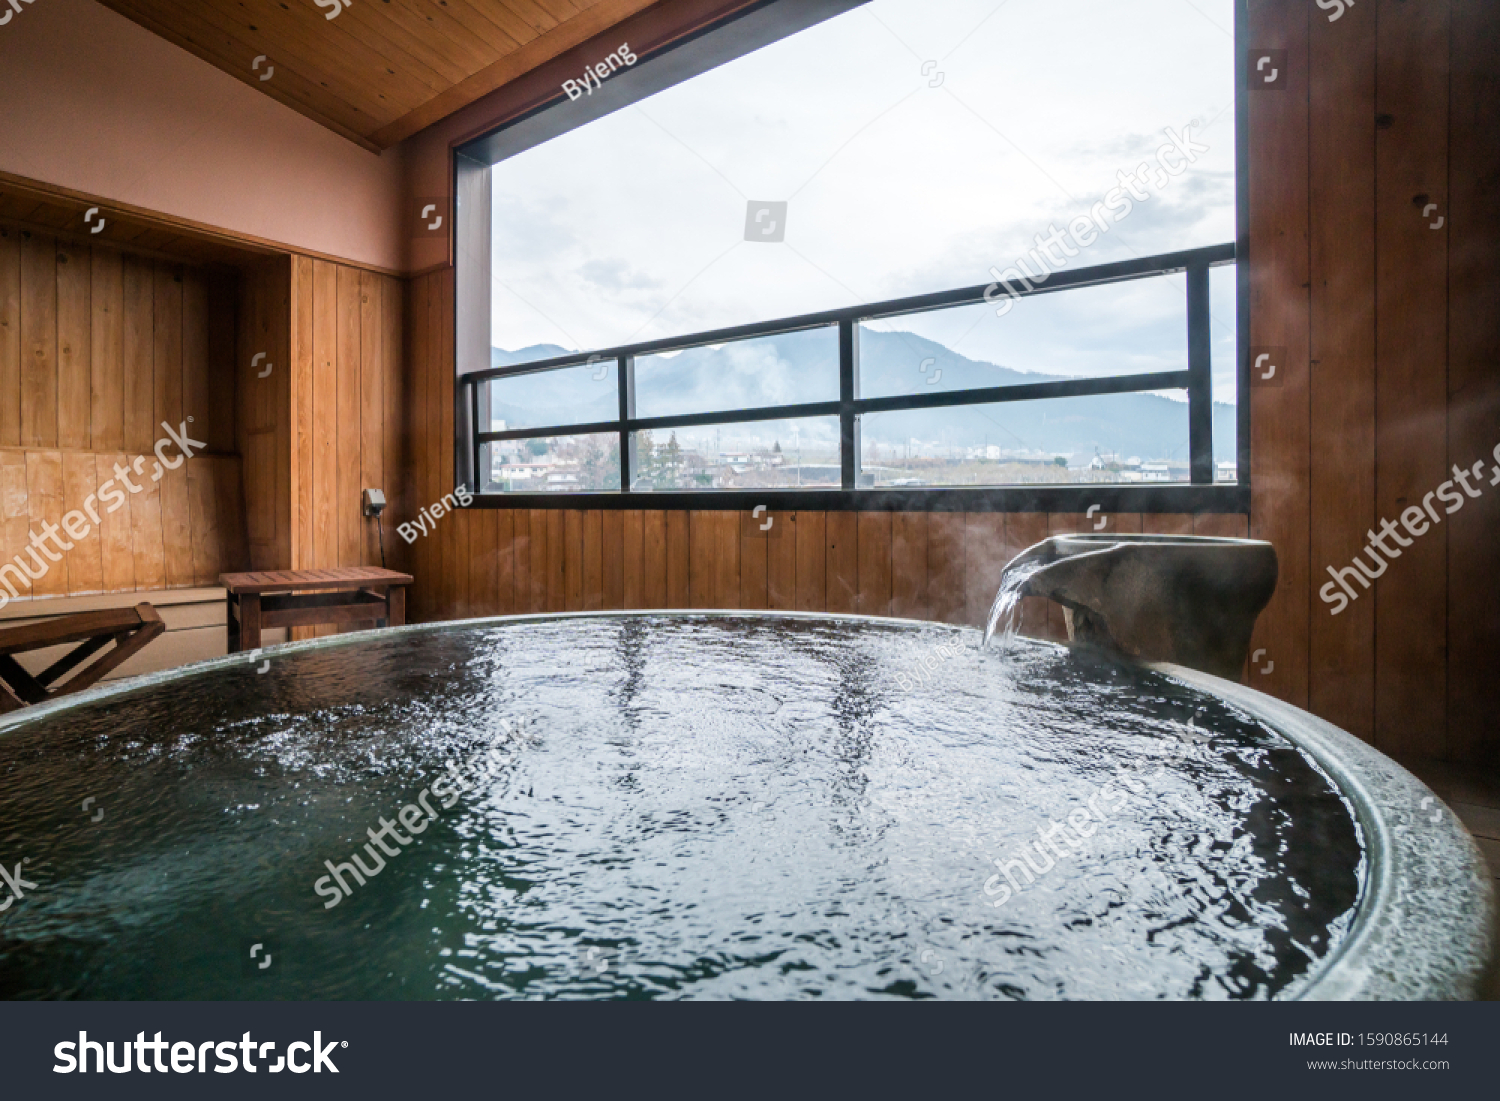 Japanese traditional style shower room named "Onsen", hot spring #1590865144